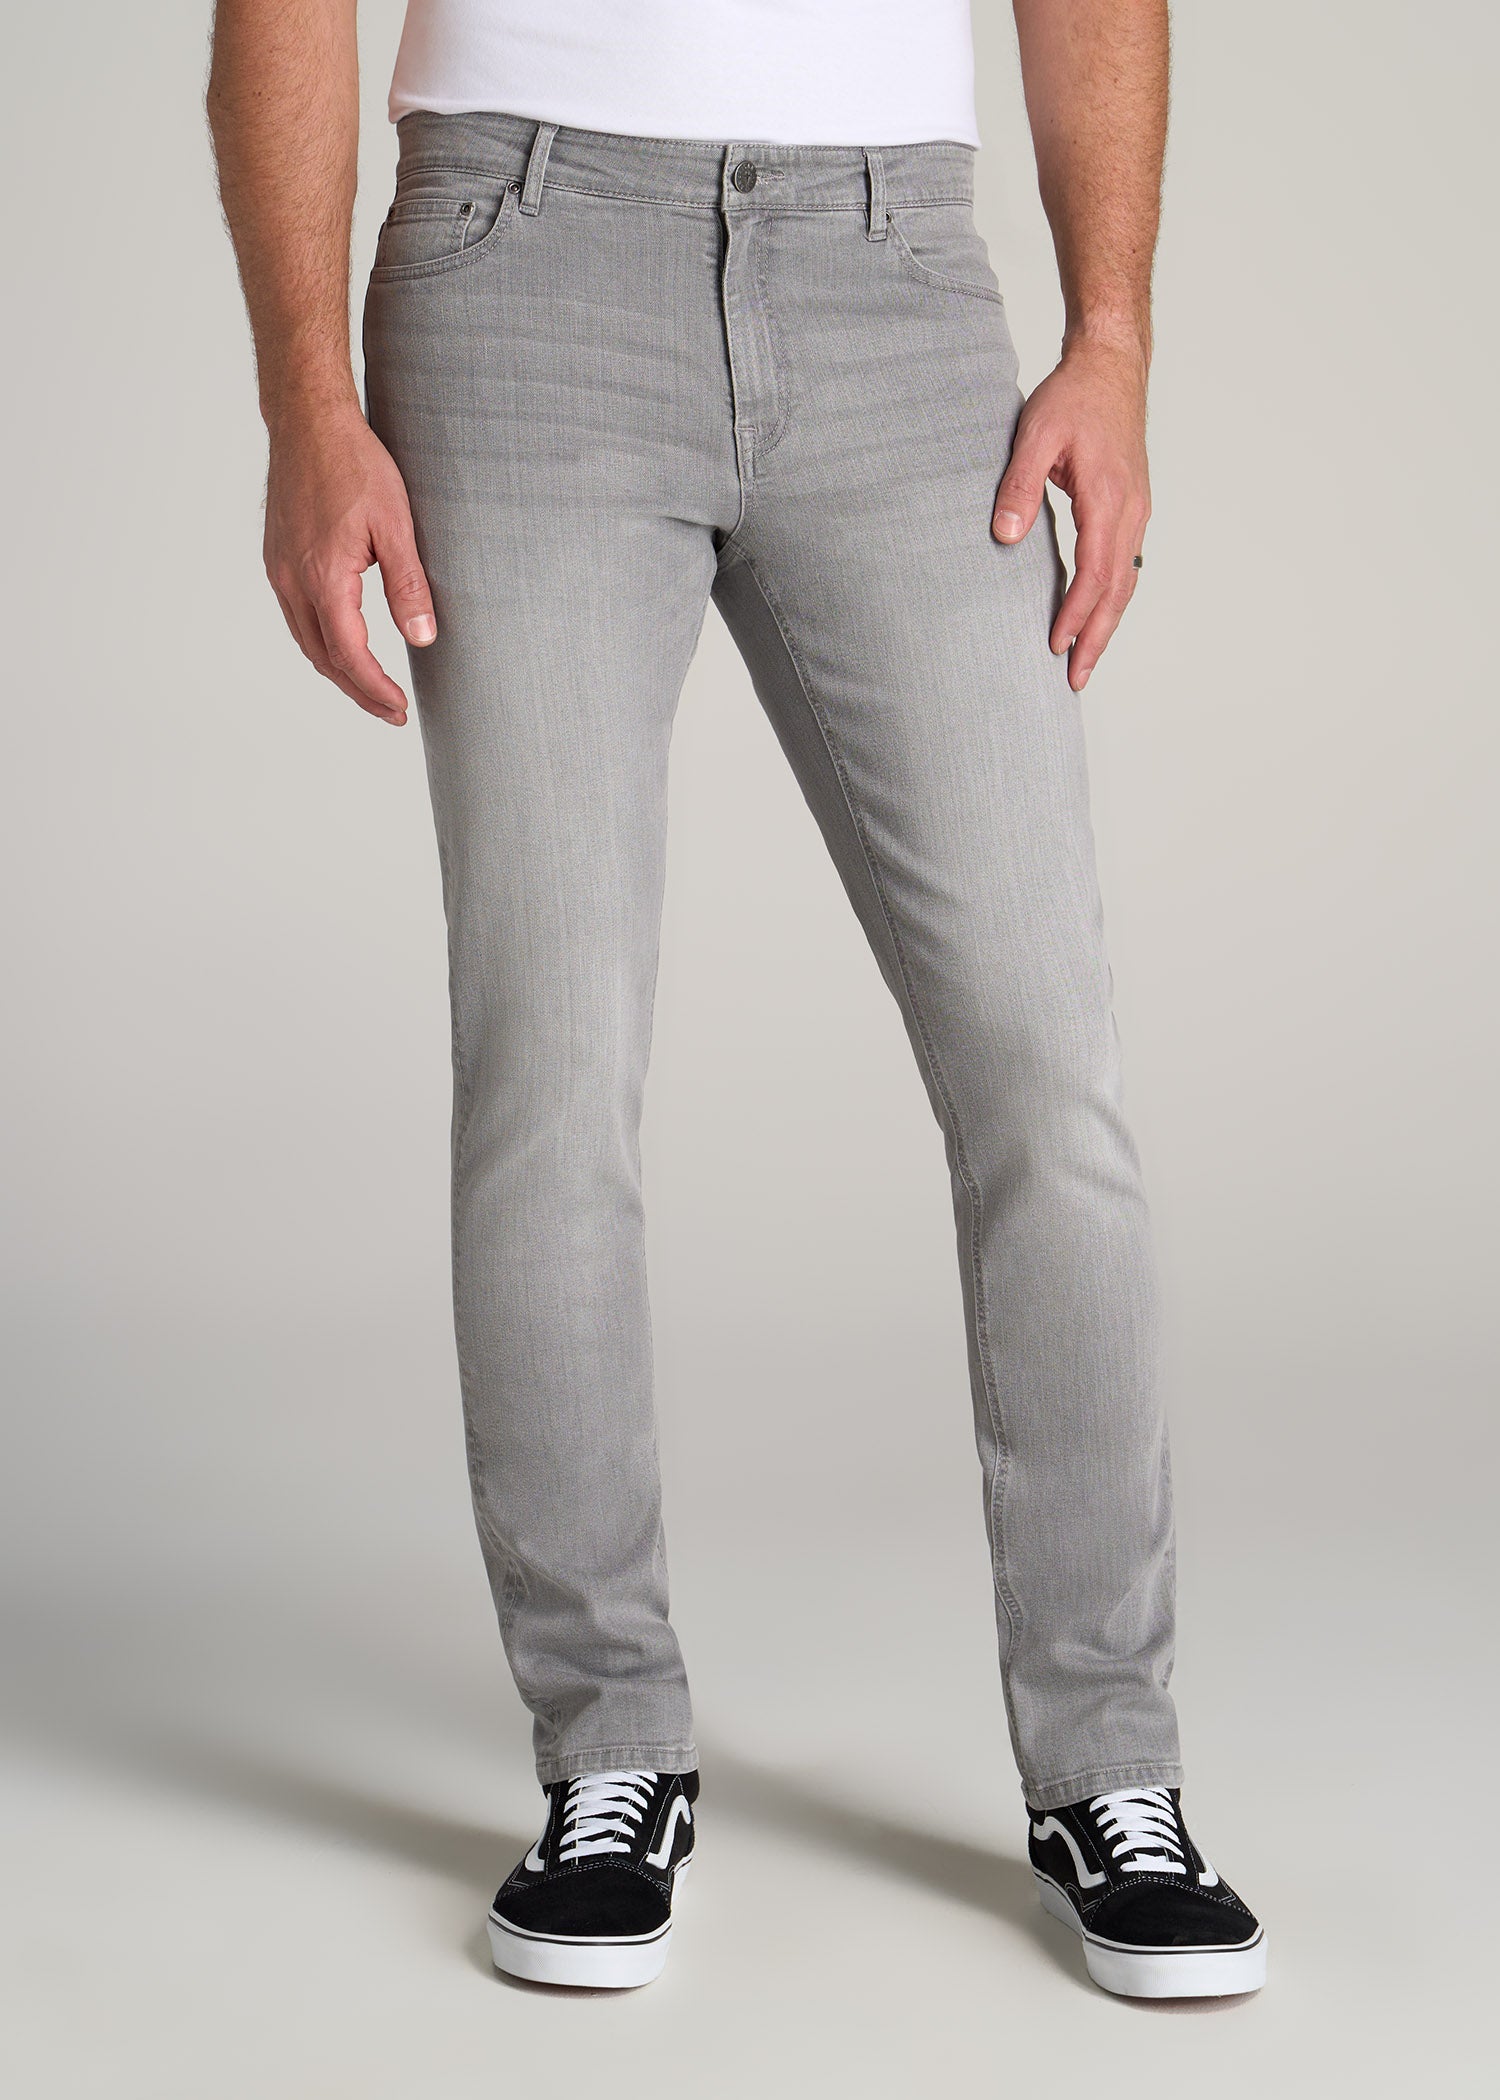     American-Tall-Men-Dylan-Slim-Fit-Jeans-Concrete-Grey-front